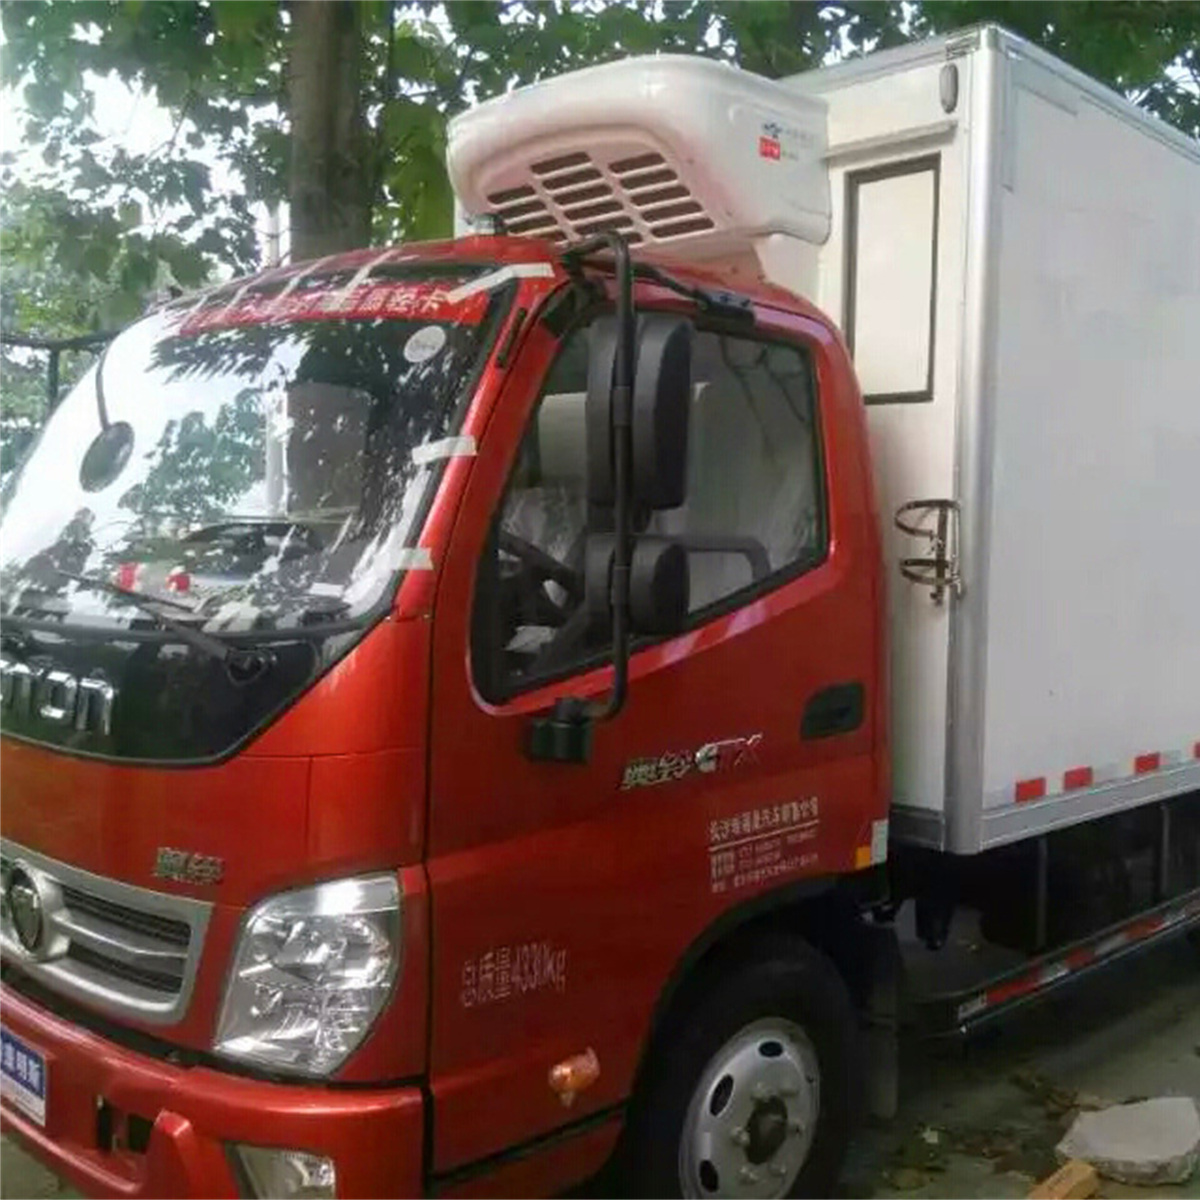 Kingclima truck reefer unit K-460 was exported to Southeast Asia